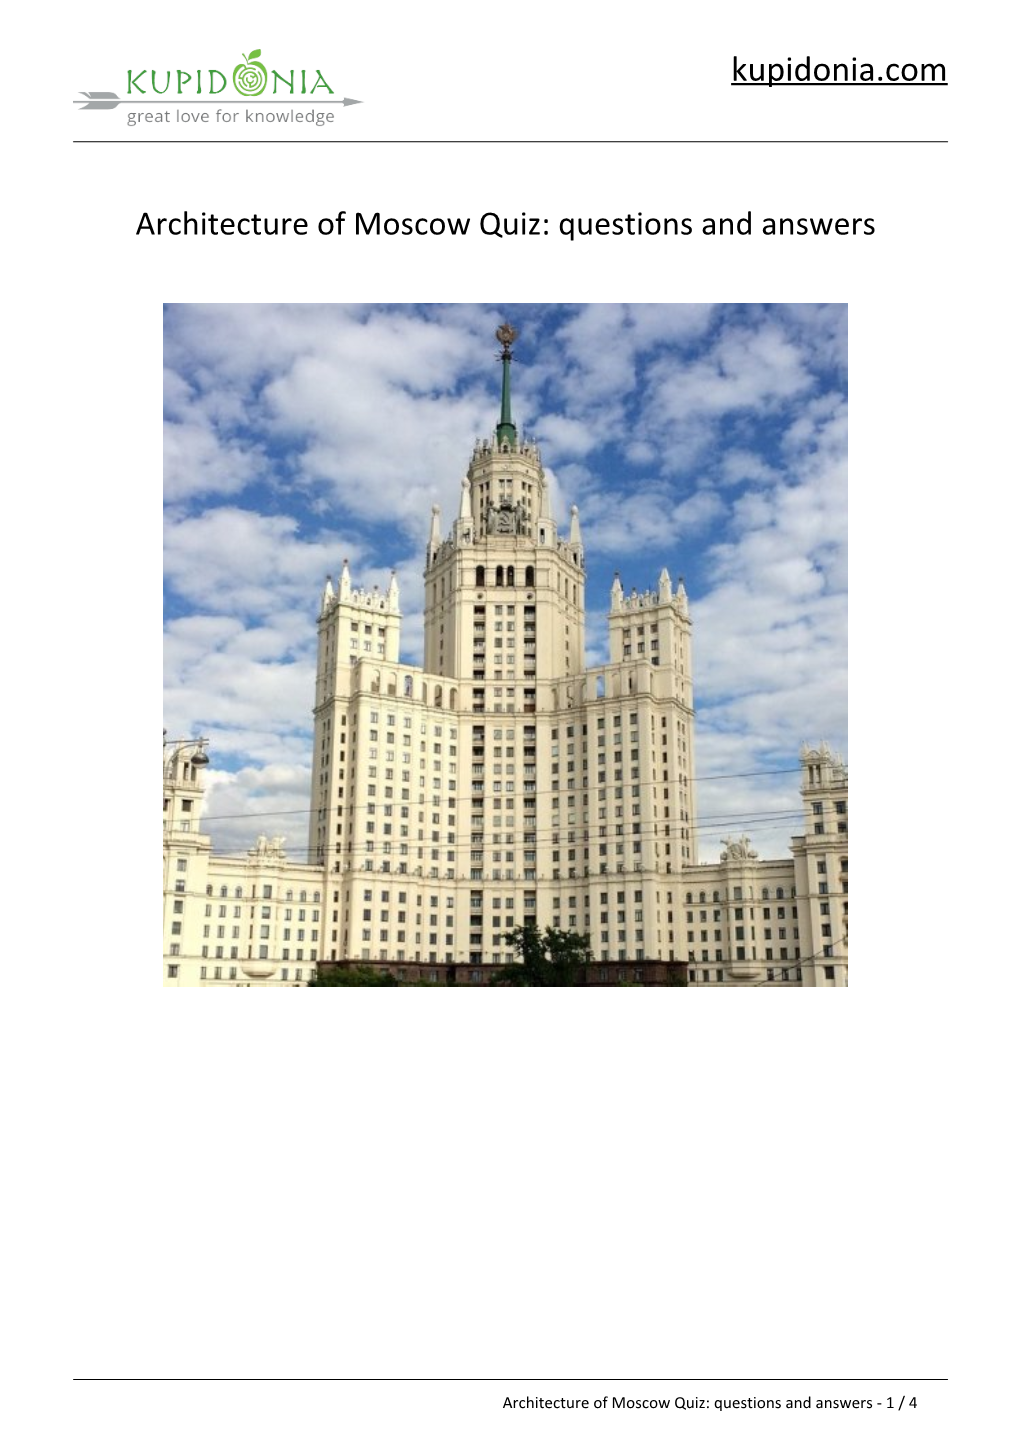 Architecture of Moscow Quiz: Questions and Answers